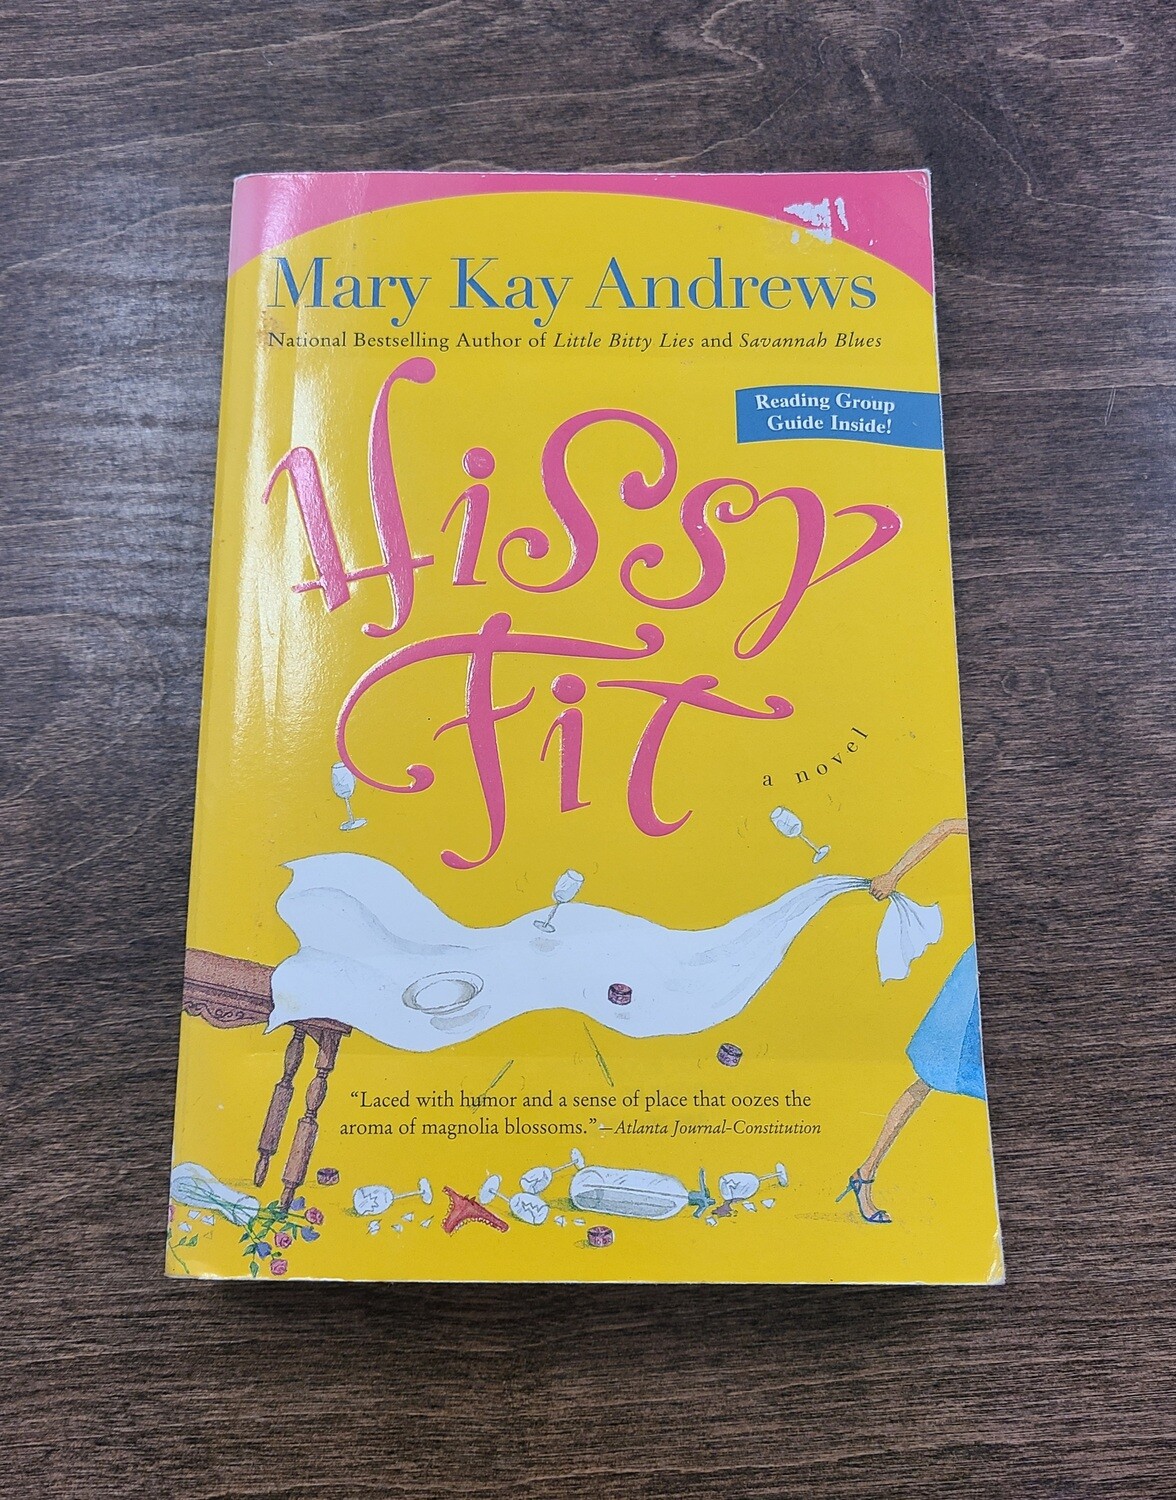 Hissy Fit by Mary Kay Andrews